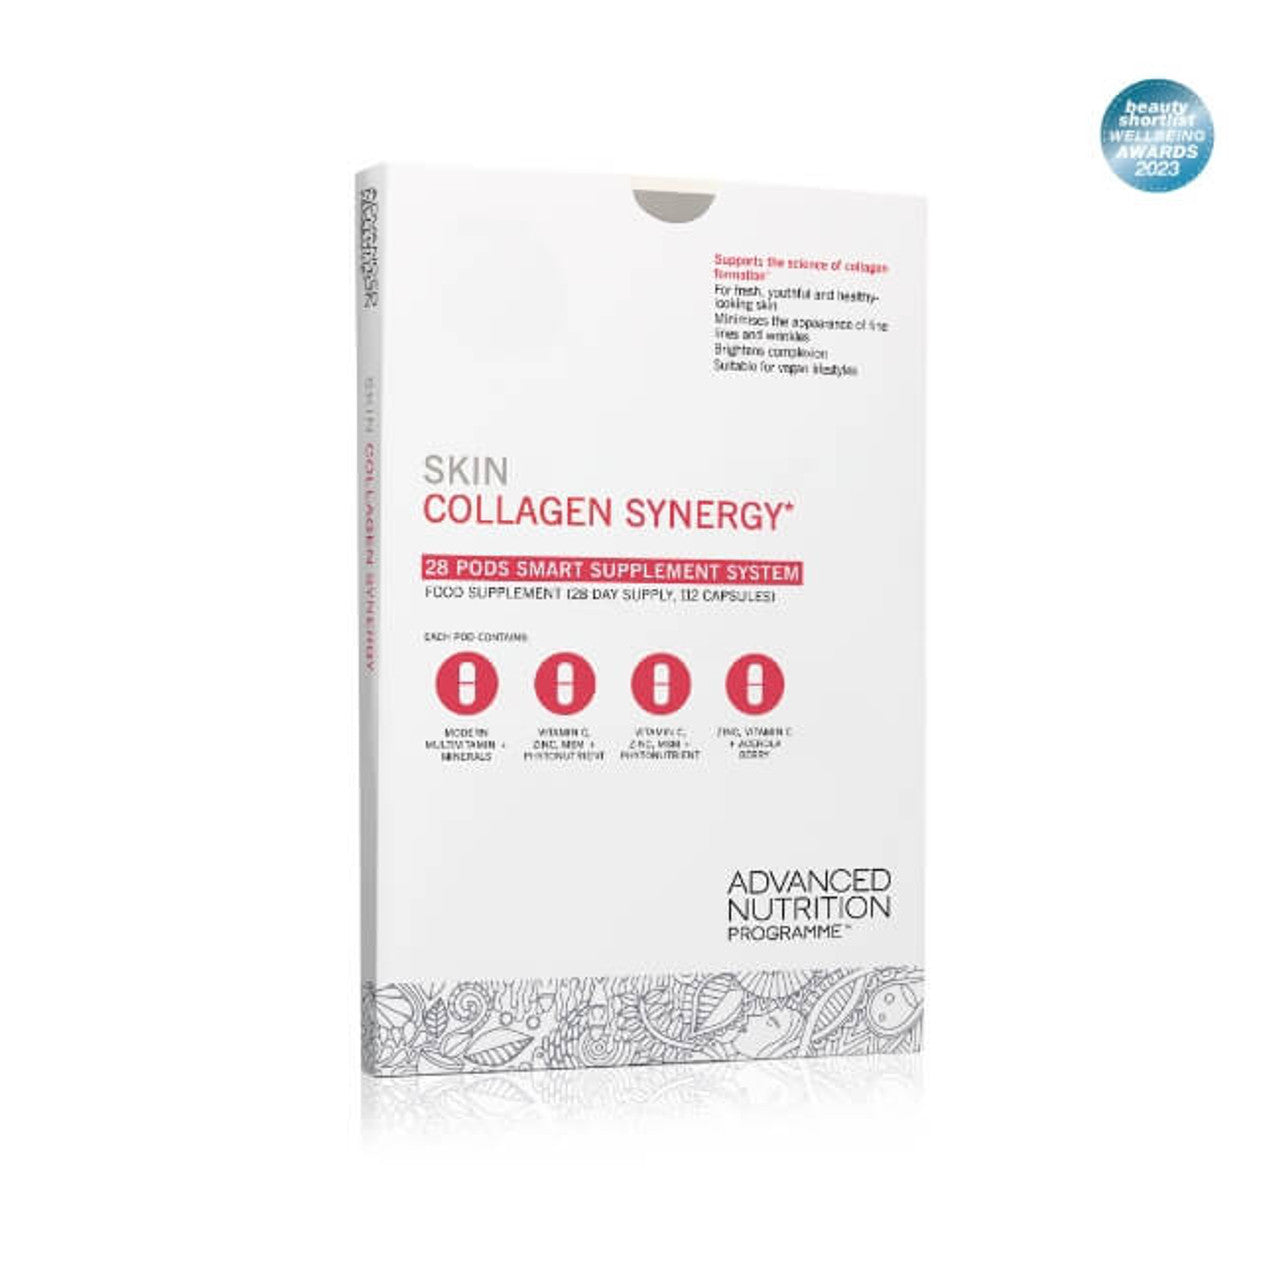 Advanced Nutrition Collagen Synergy product image. 